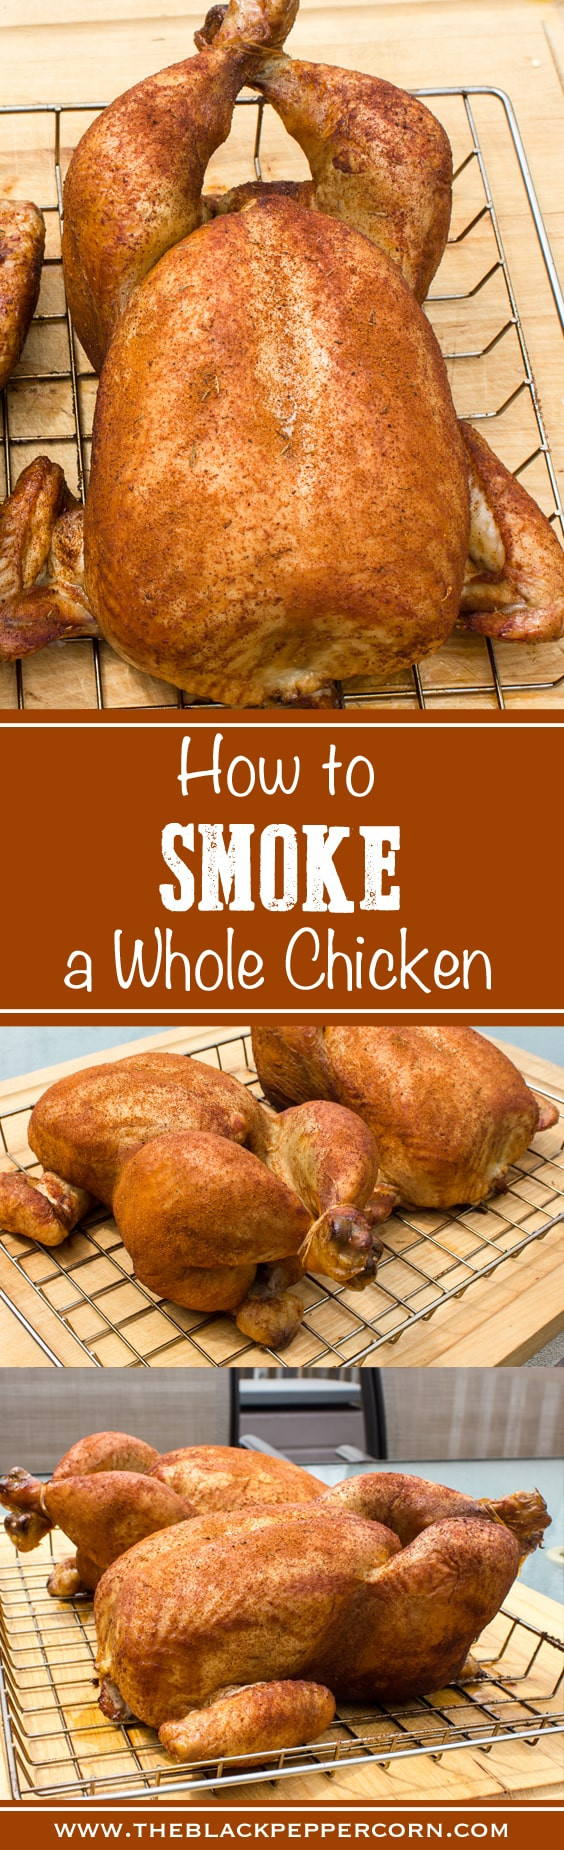 How To Smoke A Whole Chicken
 How to Smoke a Whole Chicken in the Bradley Electric Smoker